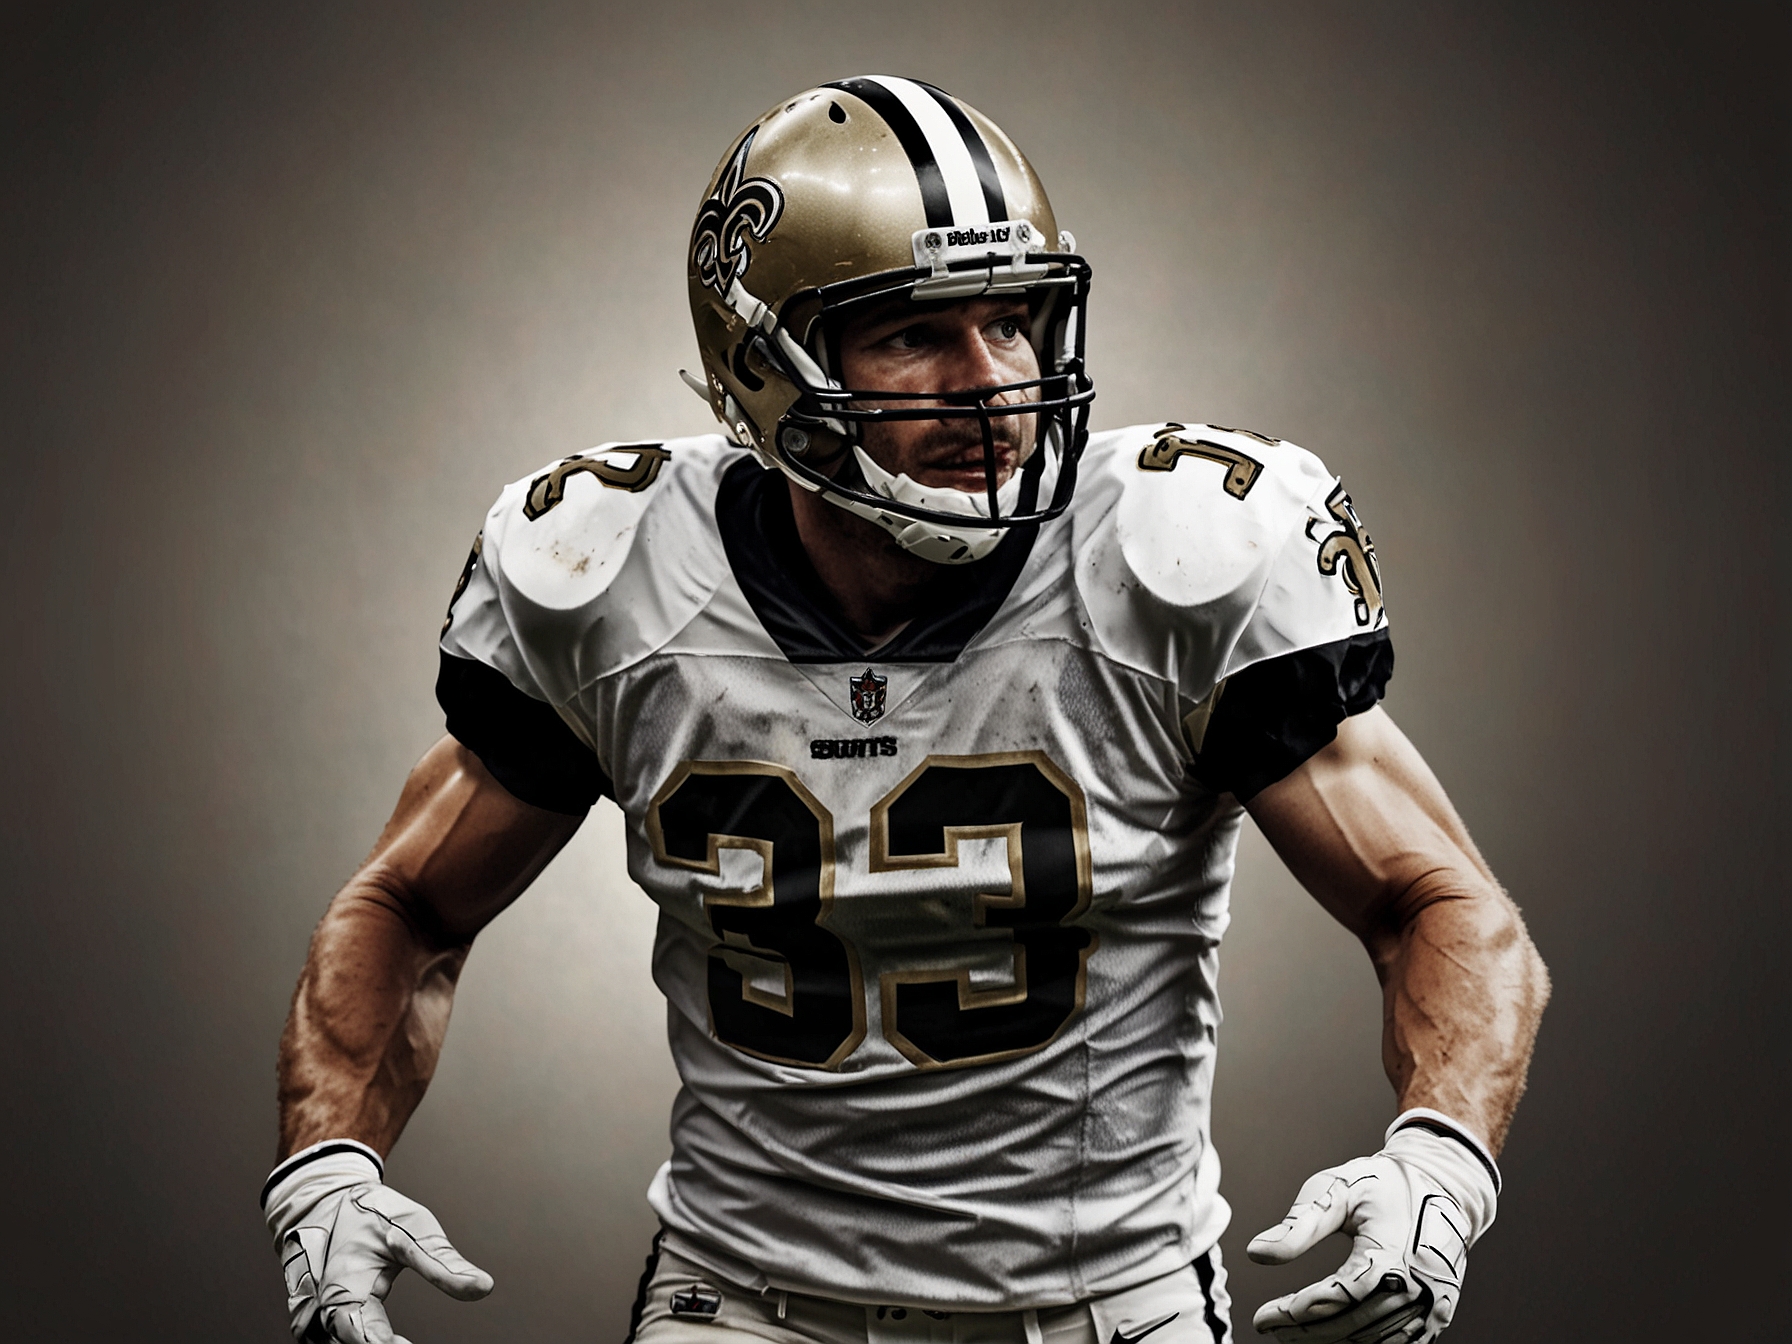 Steve Gleason, wearing his New Orleans Saints uniform, during a memorable game where he made a game-changing punt block against the Atlanta Falcons, symbolizing resilience for the city post-Katrina.